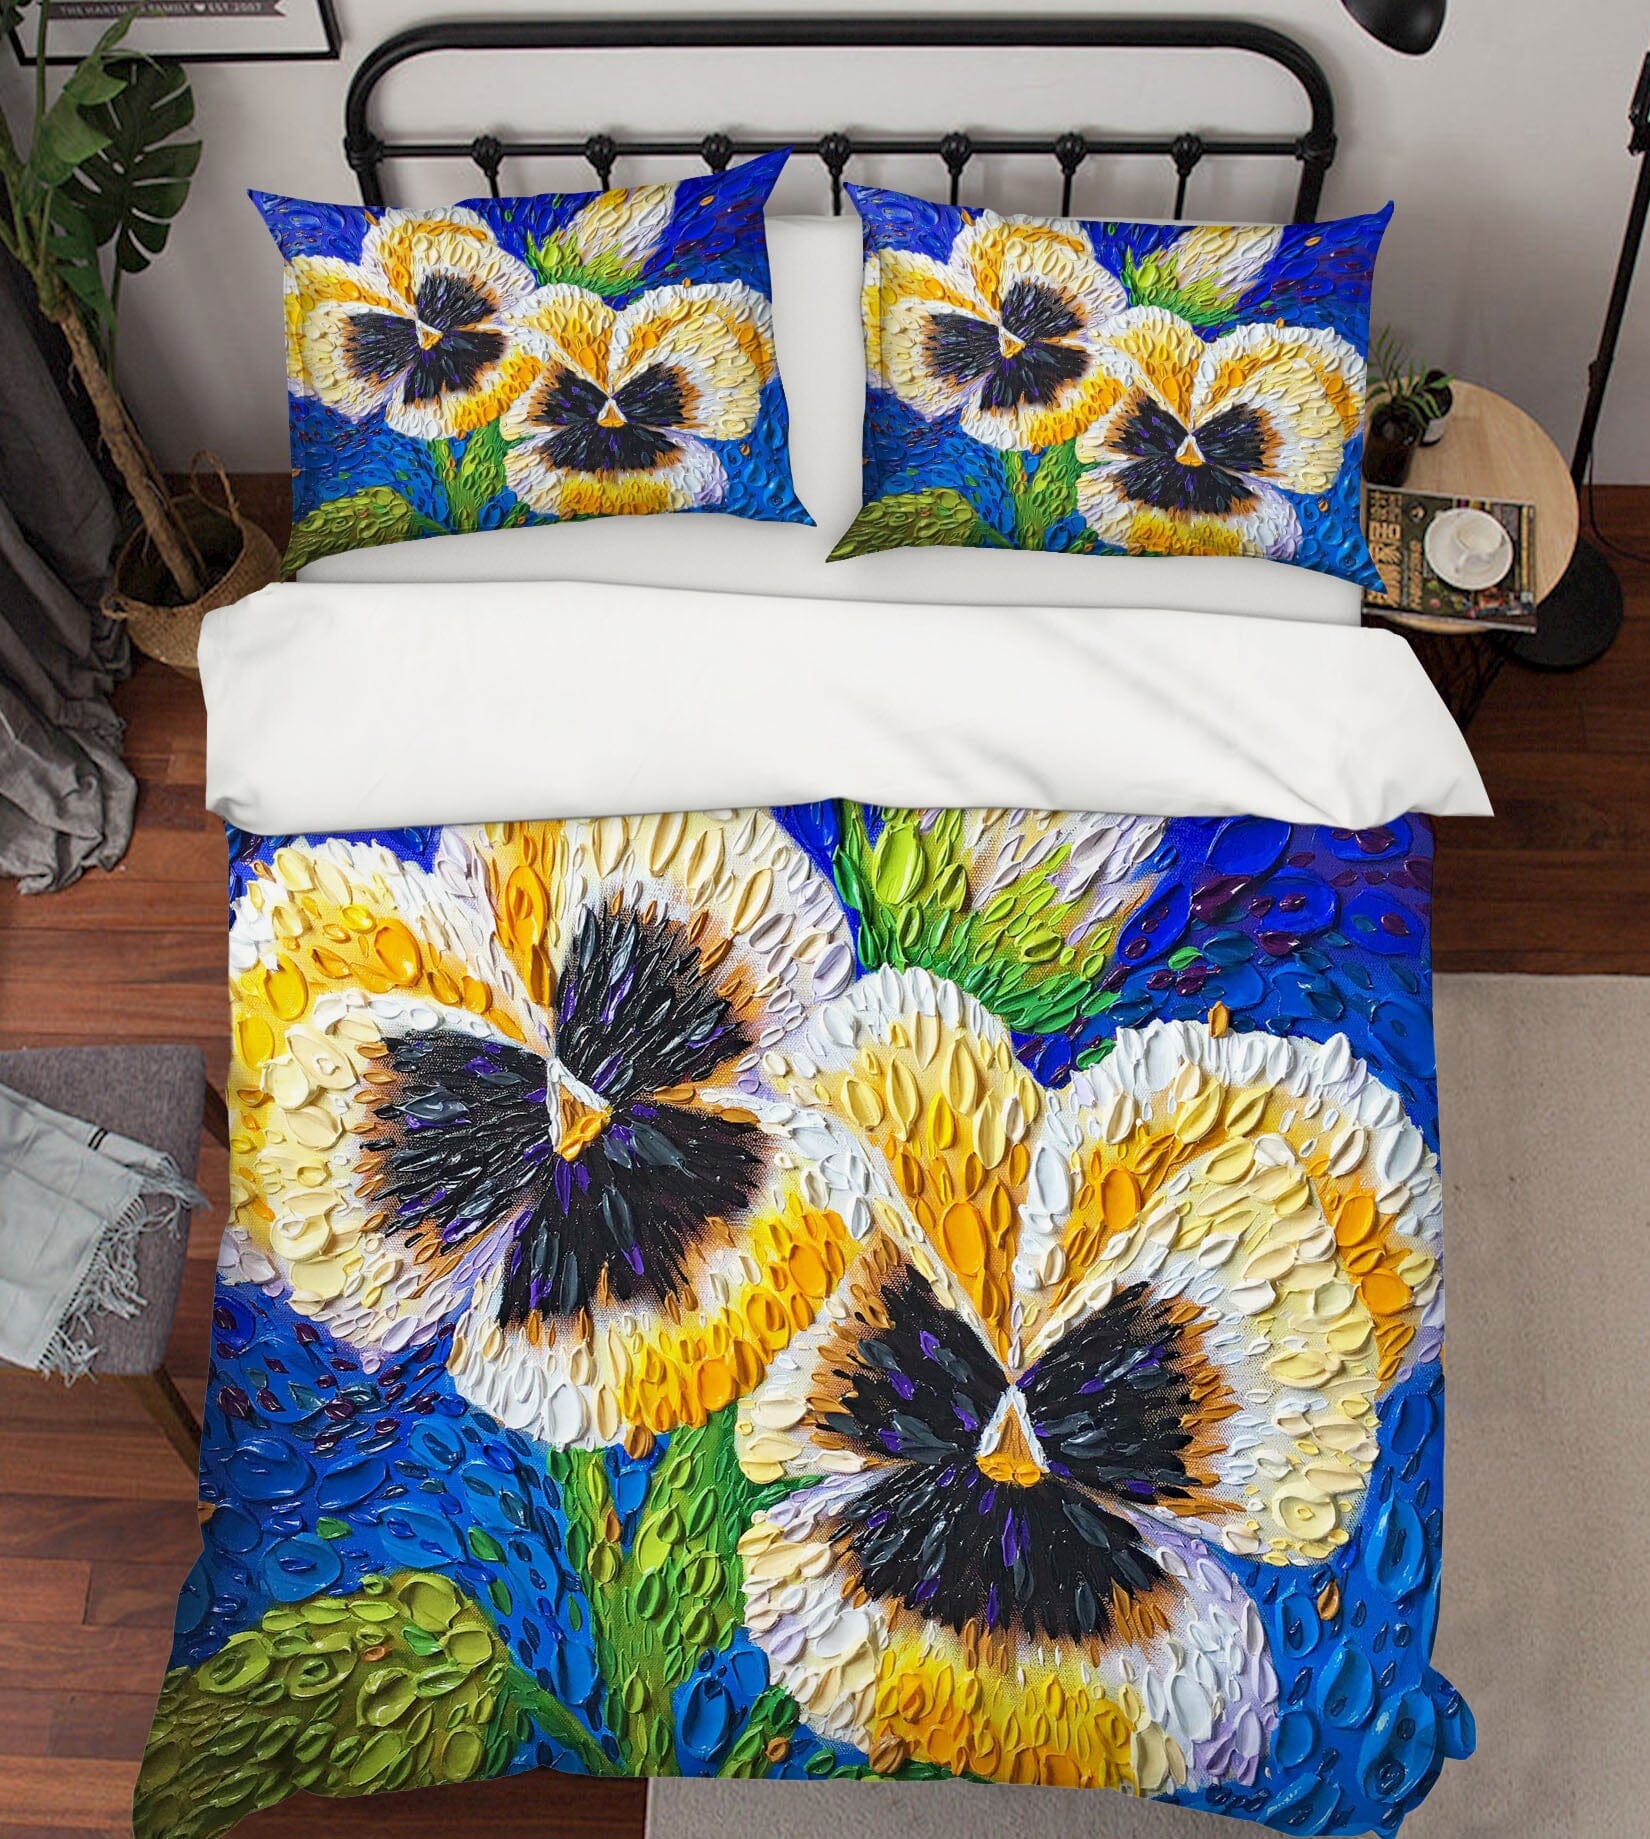 3D Pansy 2128 Dena Tollefson bedding Bed Pillowcases Quilt Quiet Covers AJ Creativity Home 